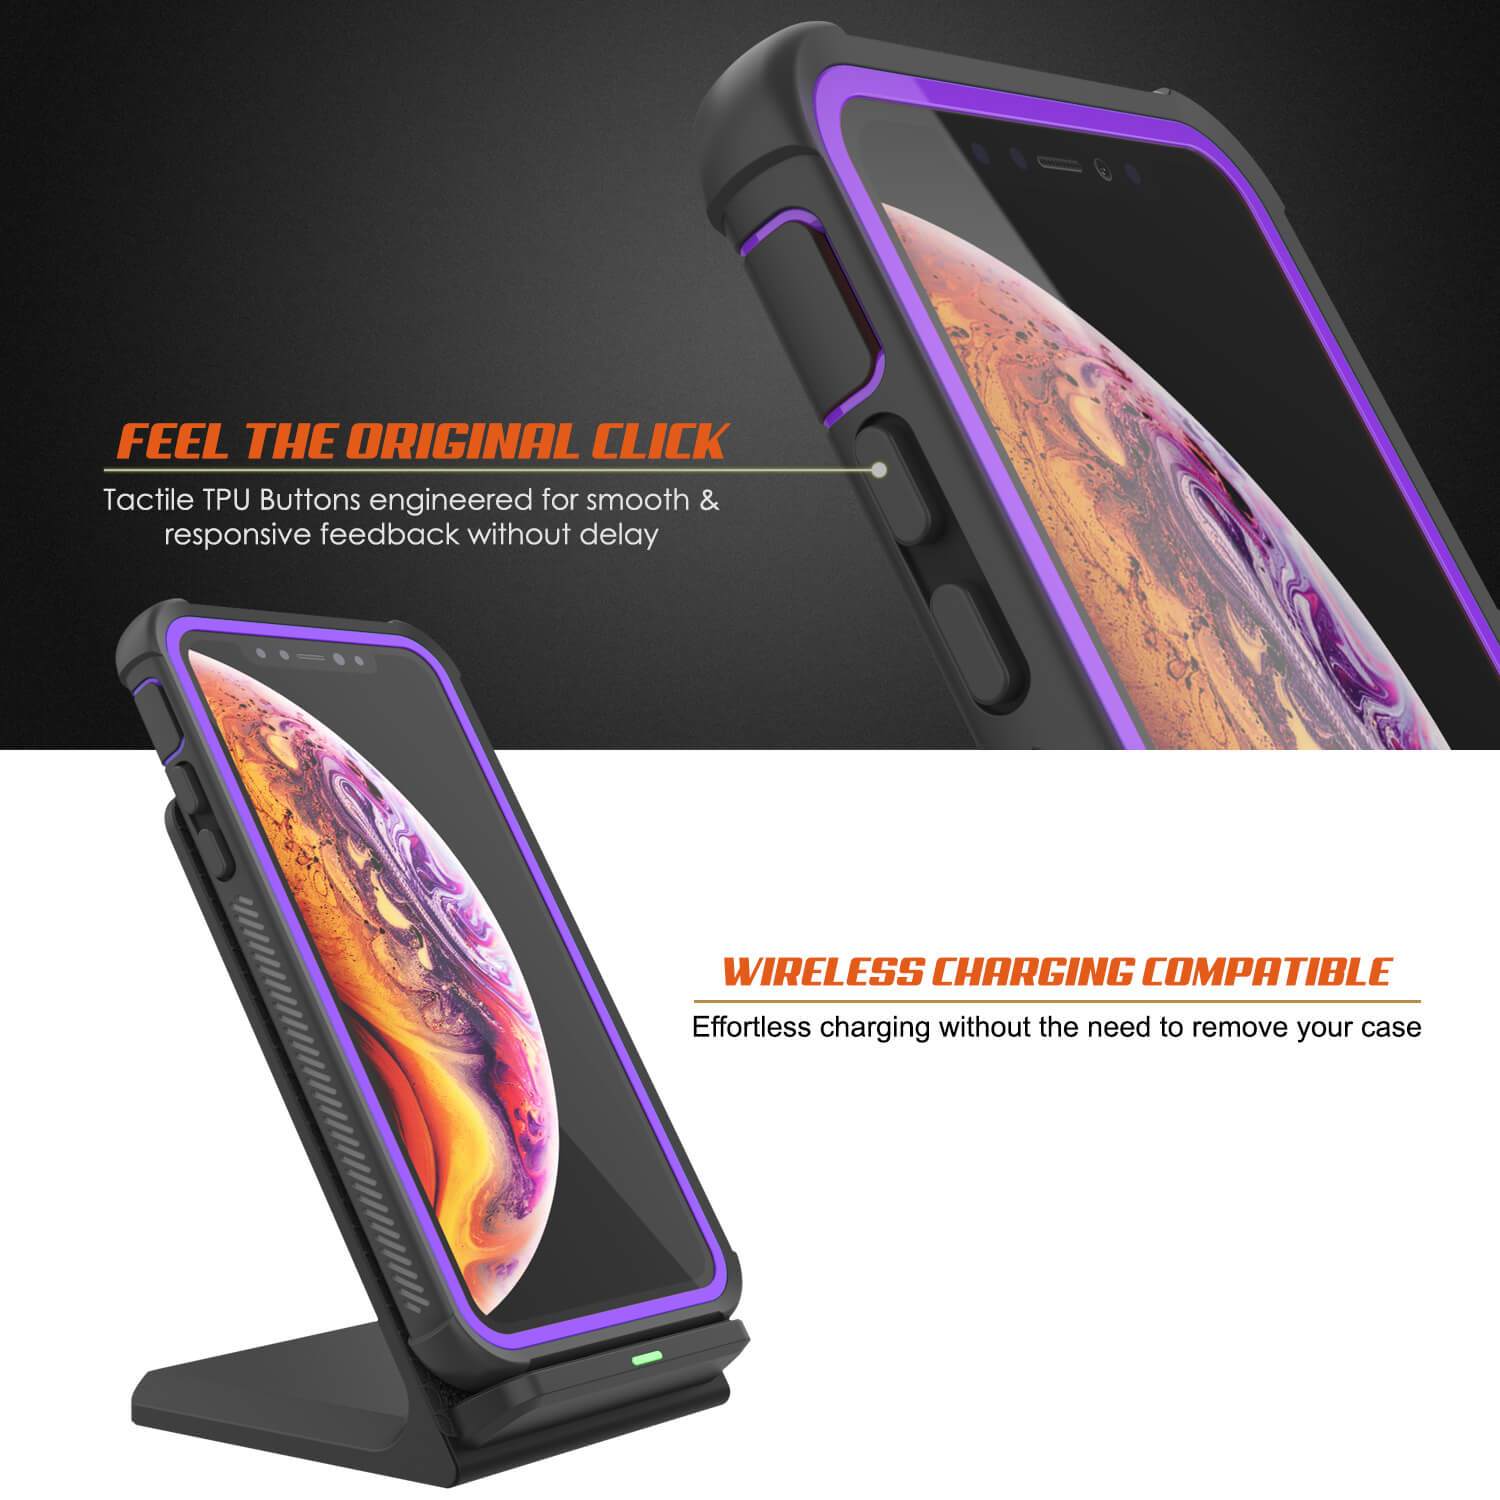 PunkCase iPhone XS Case, [Spartan Series] Clear Rugged Heavy Duty Cover W/Built in Screen Protector [Purple]